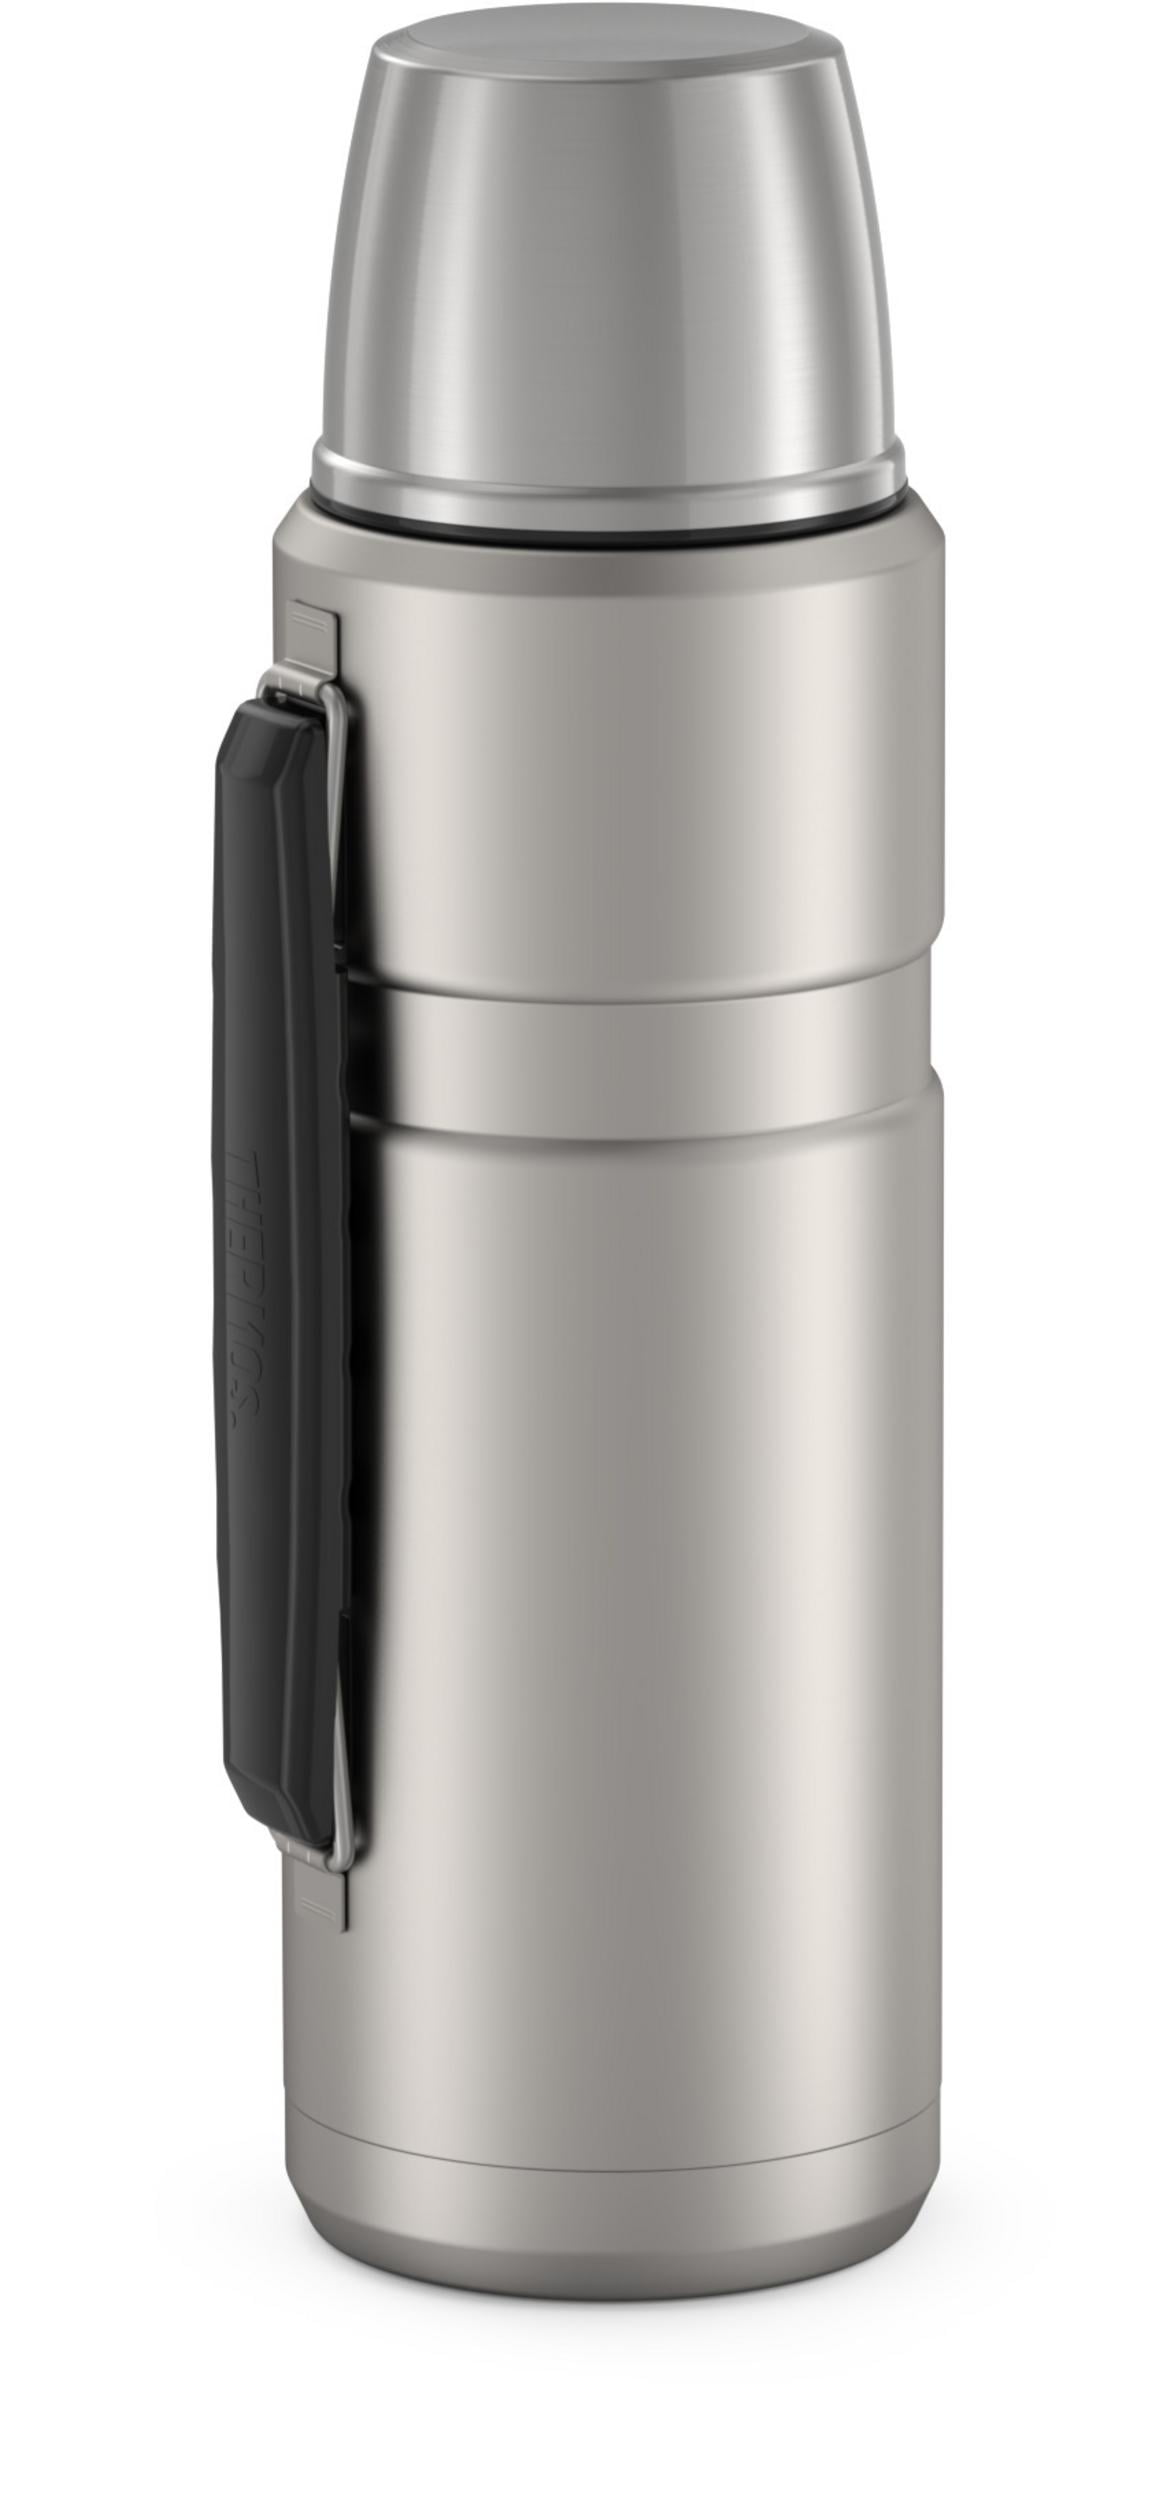 Thermos 2L Stainless King Vacuum Insulated Stainless Steel Beverage Bottle  